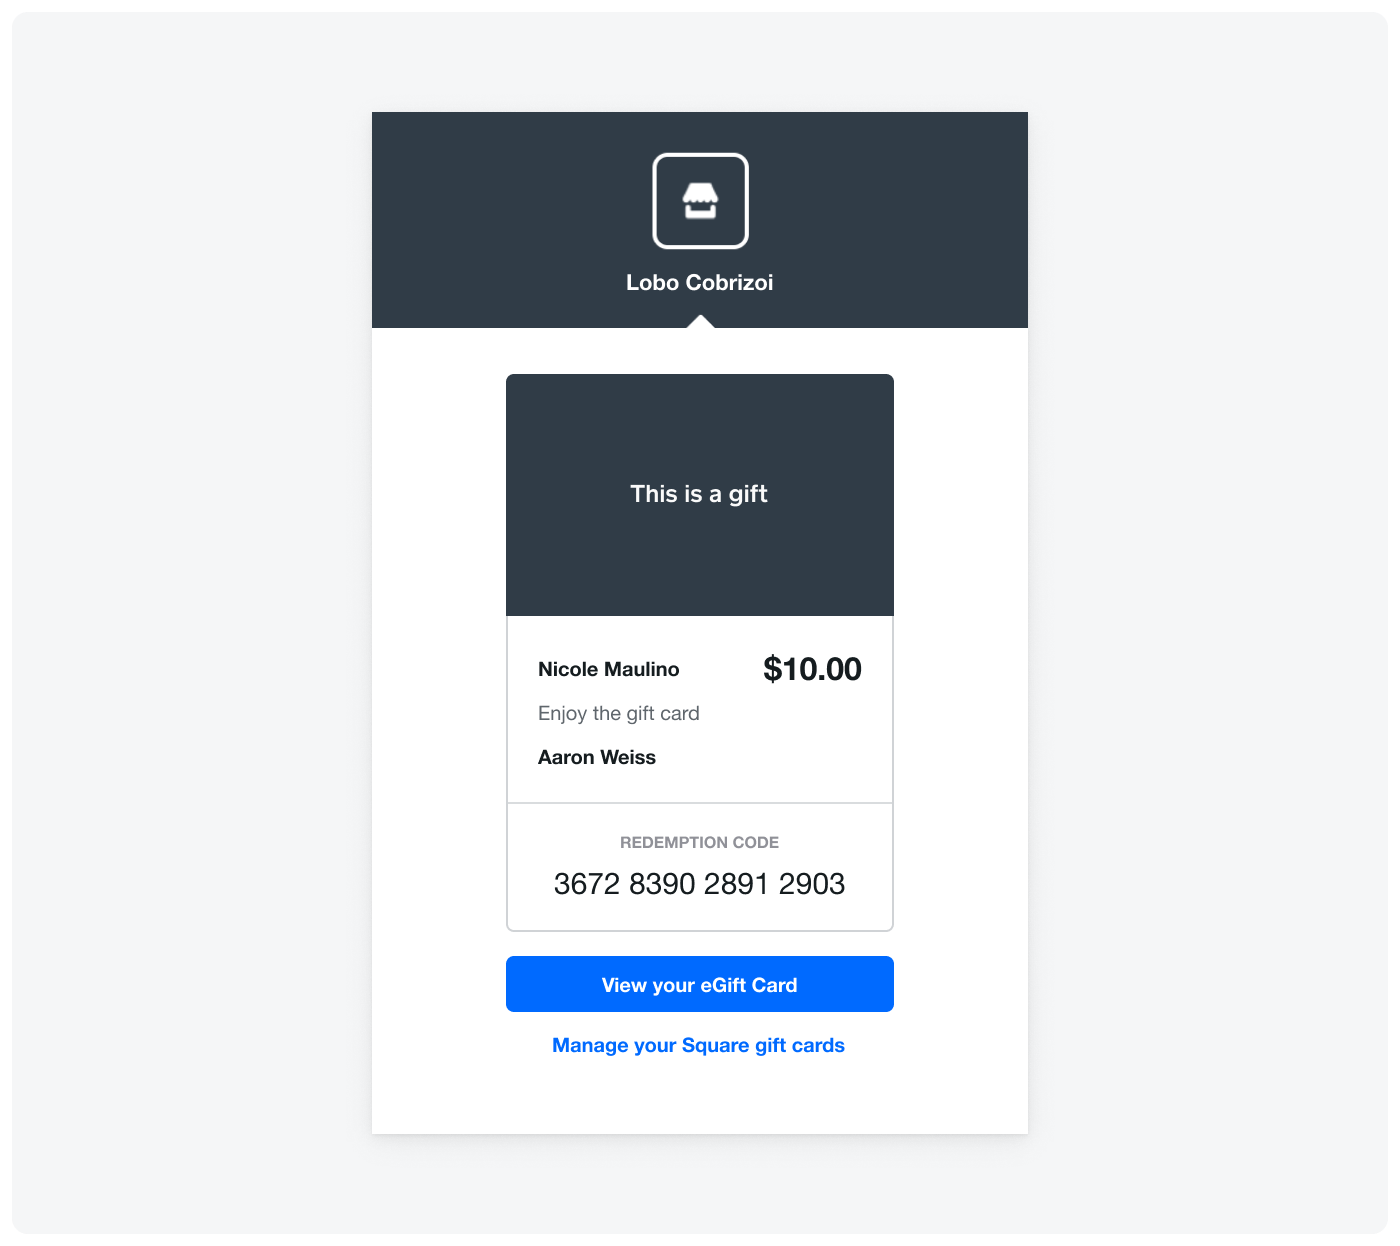 An example digital gift card that Square emails to customers, which includes the 16-digit redemption code that buyers use to make purchases with the gift card.